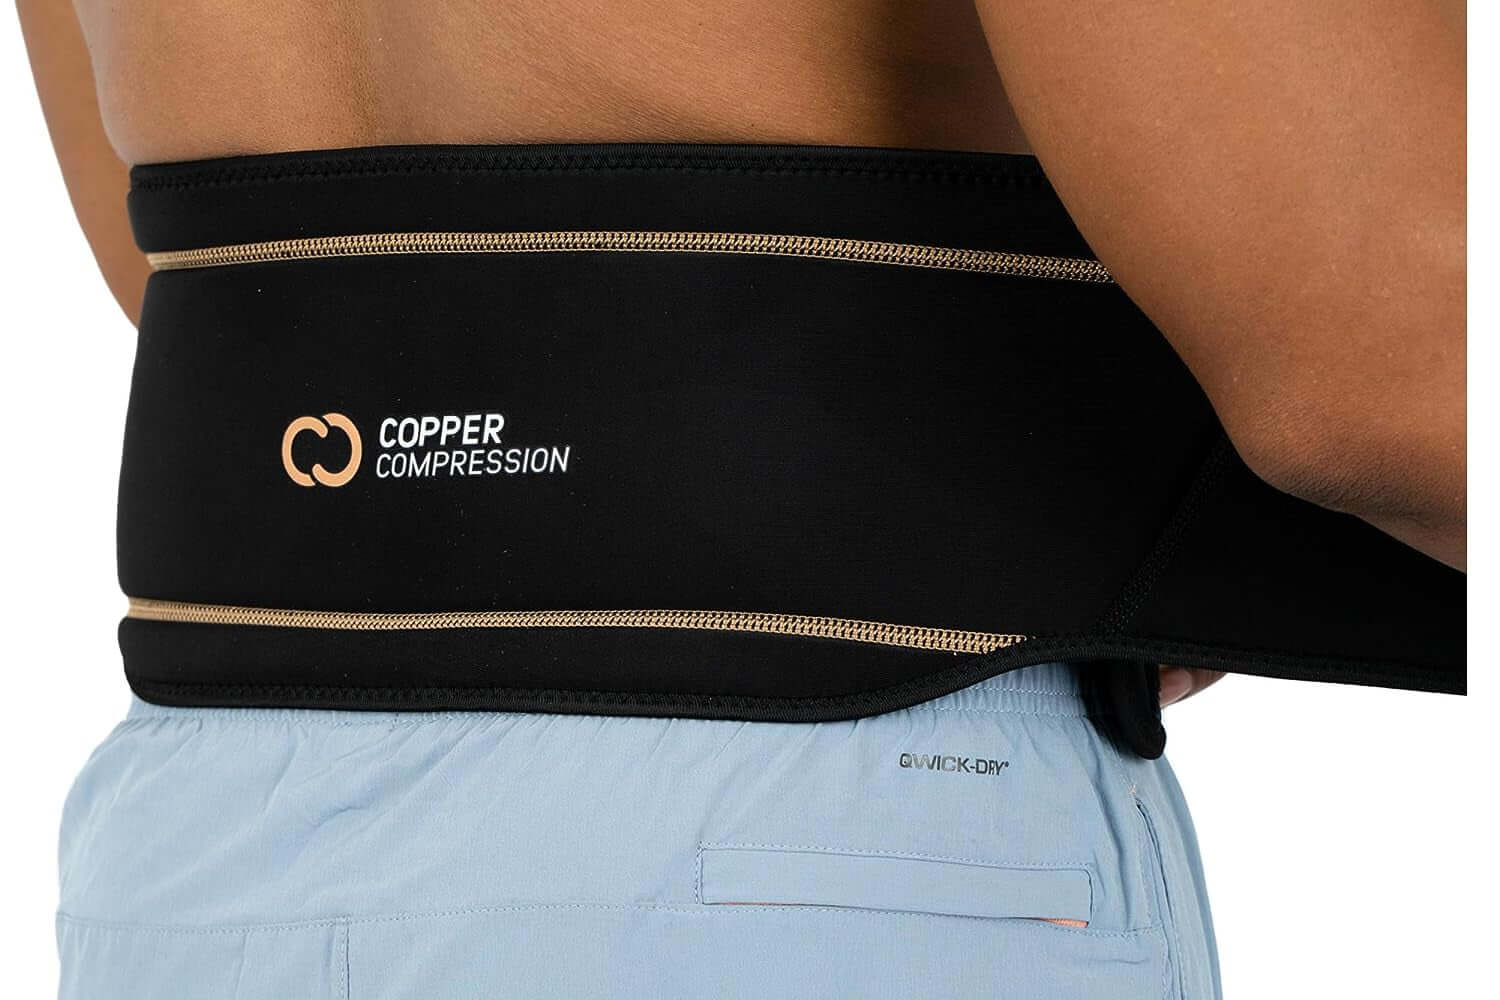 Back Brace - Copper Infused Orthopedic Lower Lumbar Support Belt. Relieves Muscle & Ligament Strain, Arthritis, Osteoporosis, Hernia, Ruptured Disc, Sciatica, Scoliosis, Fits Men & Women